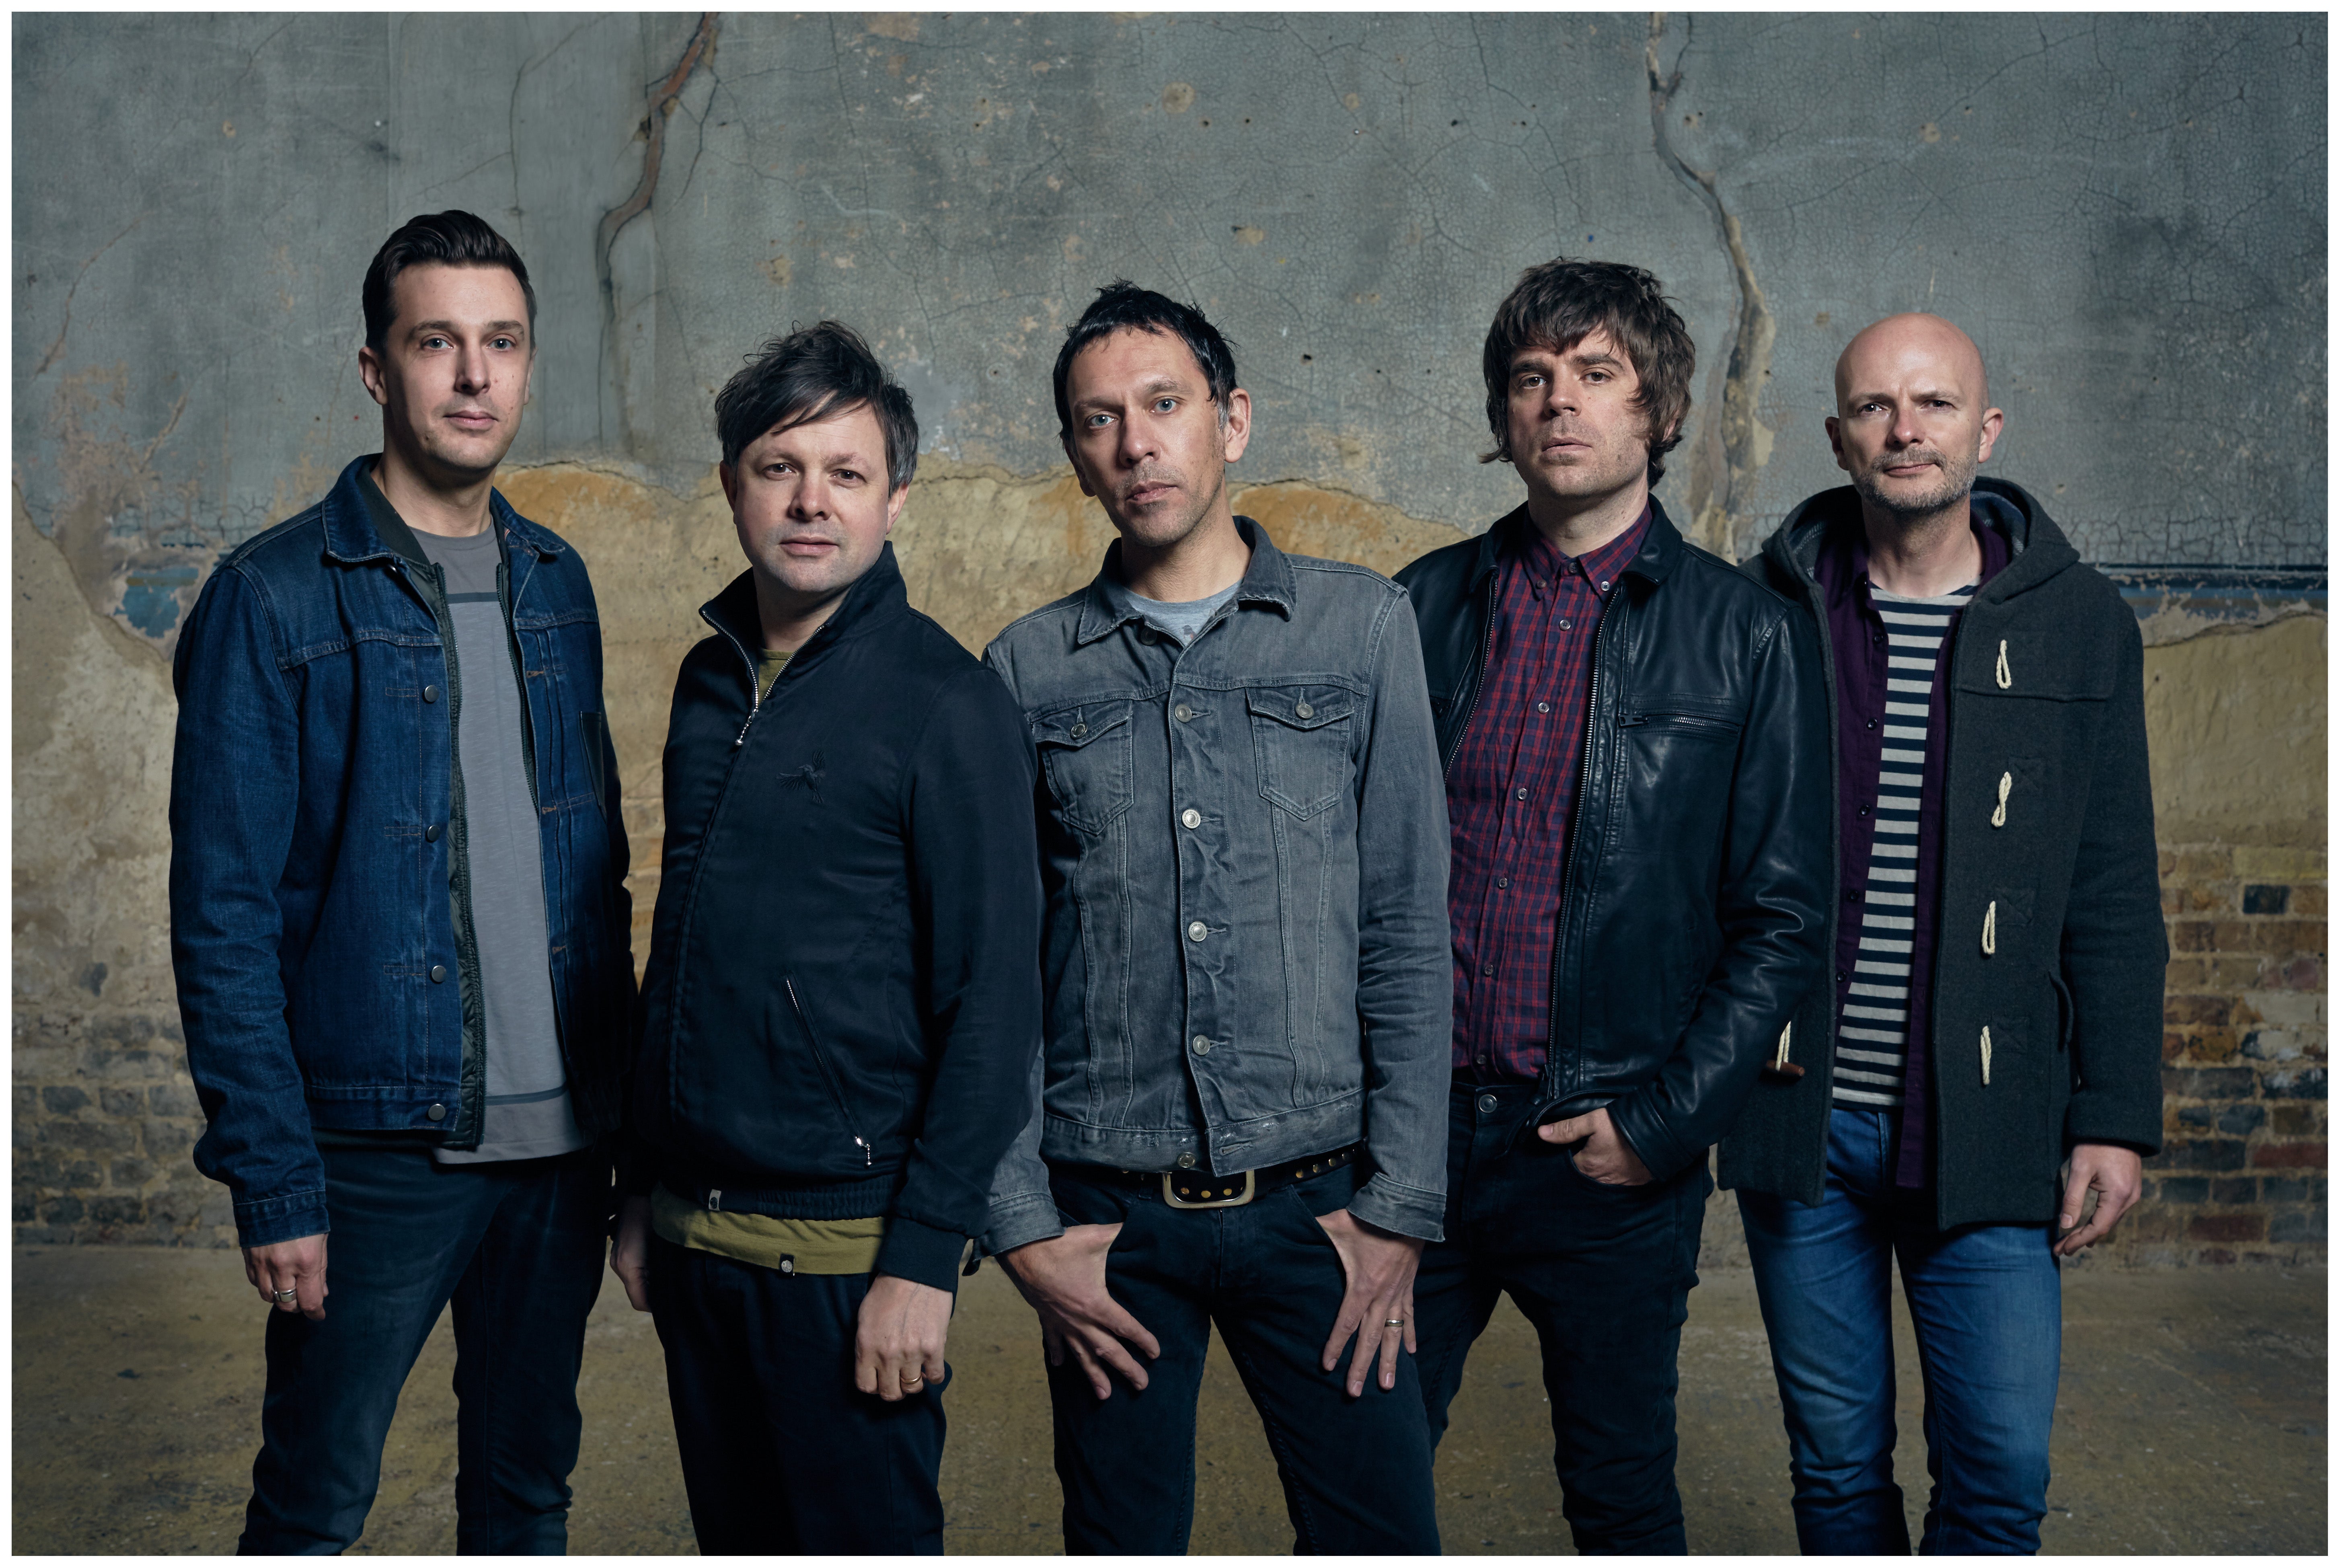 Shed Seven in Liverpool promo photo for Priority from O2 presale offer code